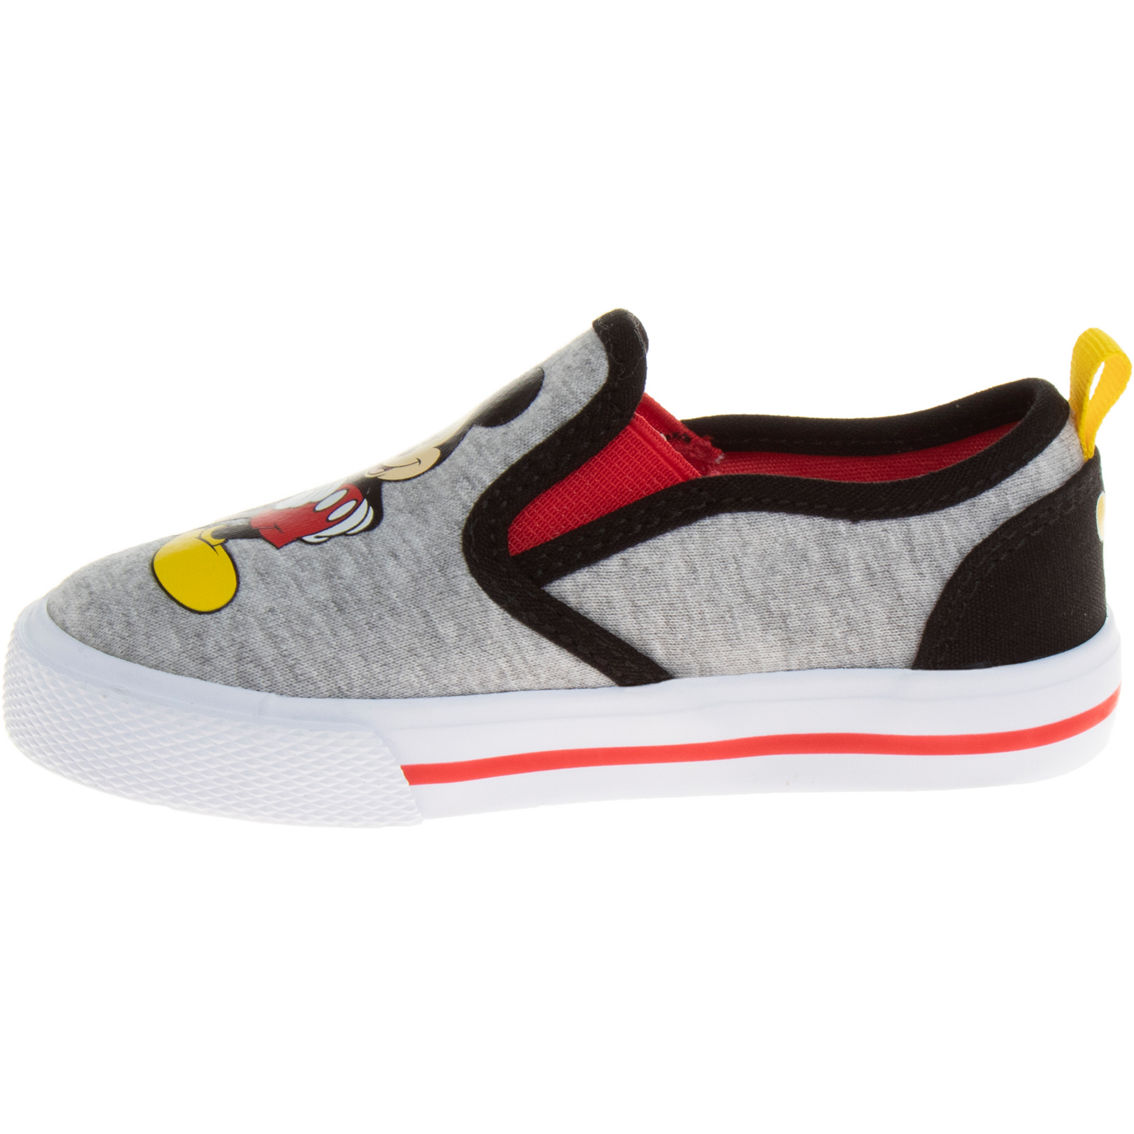 Mickey Mouse Toddler Boys Slip On Sneakers - Image 3 of 5